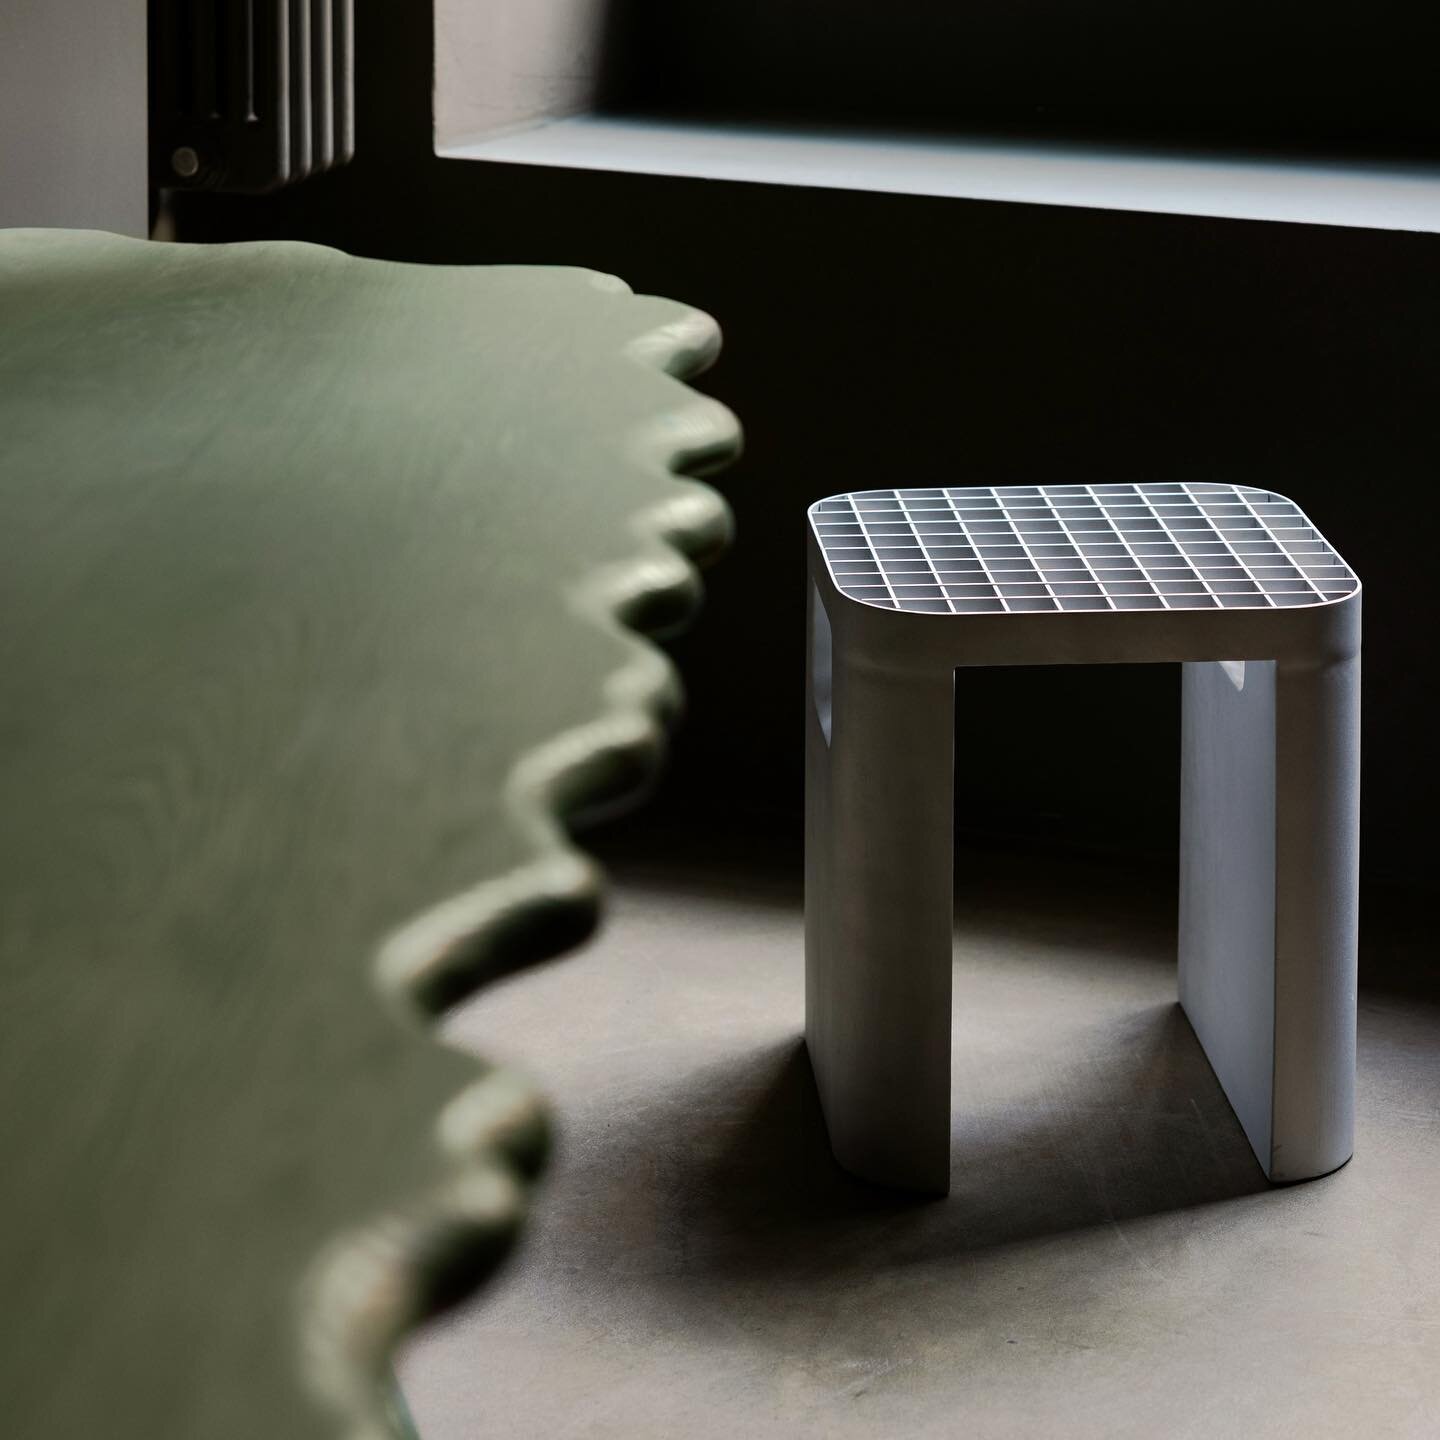 ONE stool from two weeks ago, together with JUV dining table by @ofstedaleng / @norwegianpresence Exhibition design and styling @kraakvikdorazio @bjornvandenberg Work sponsored by @shapesbyhydro - The Aluminum Knowledge Hub powered by @norskhydroasa 